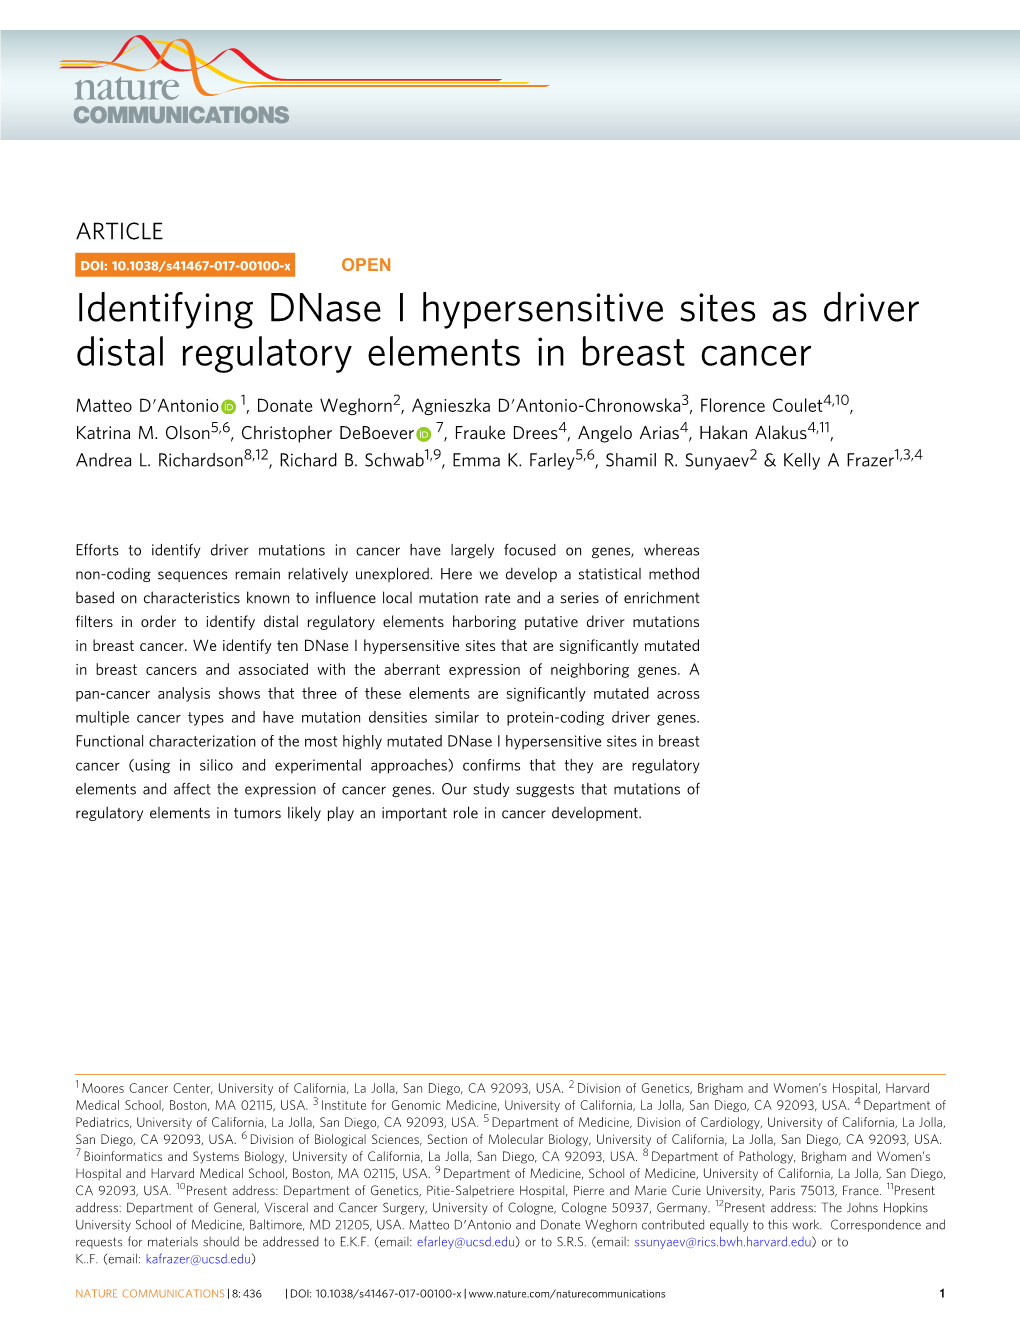 Identifying Dnase I Hypersensitive Sites As Driver Distal Regulatory Elements in Breast Cancer